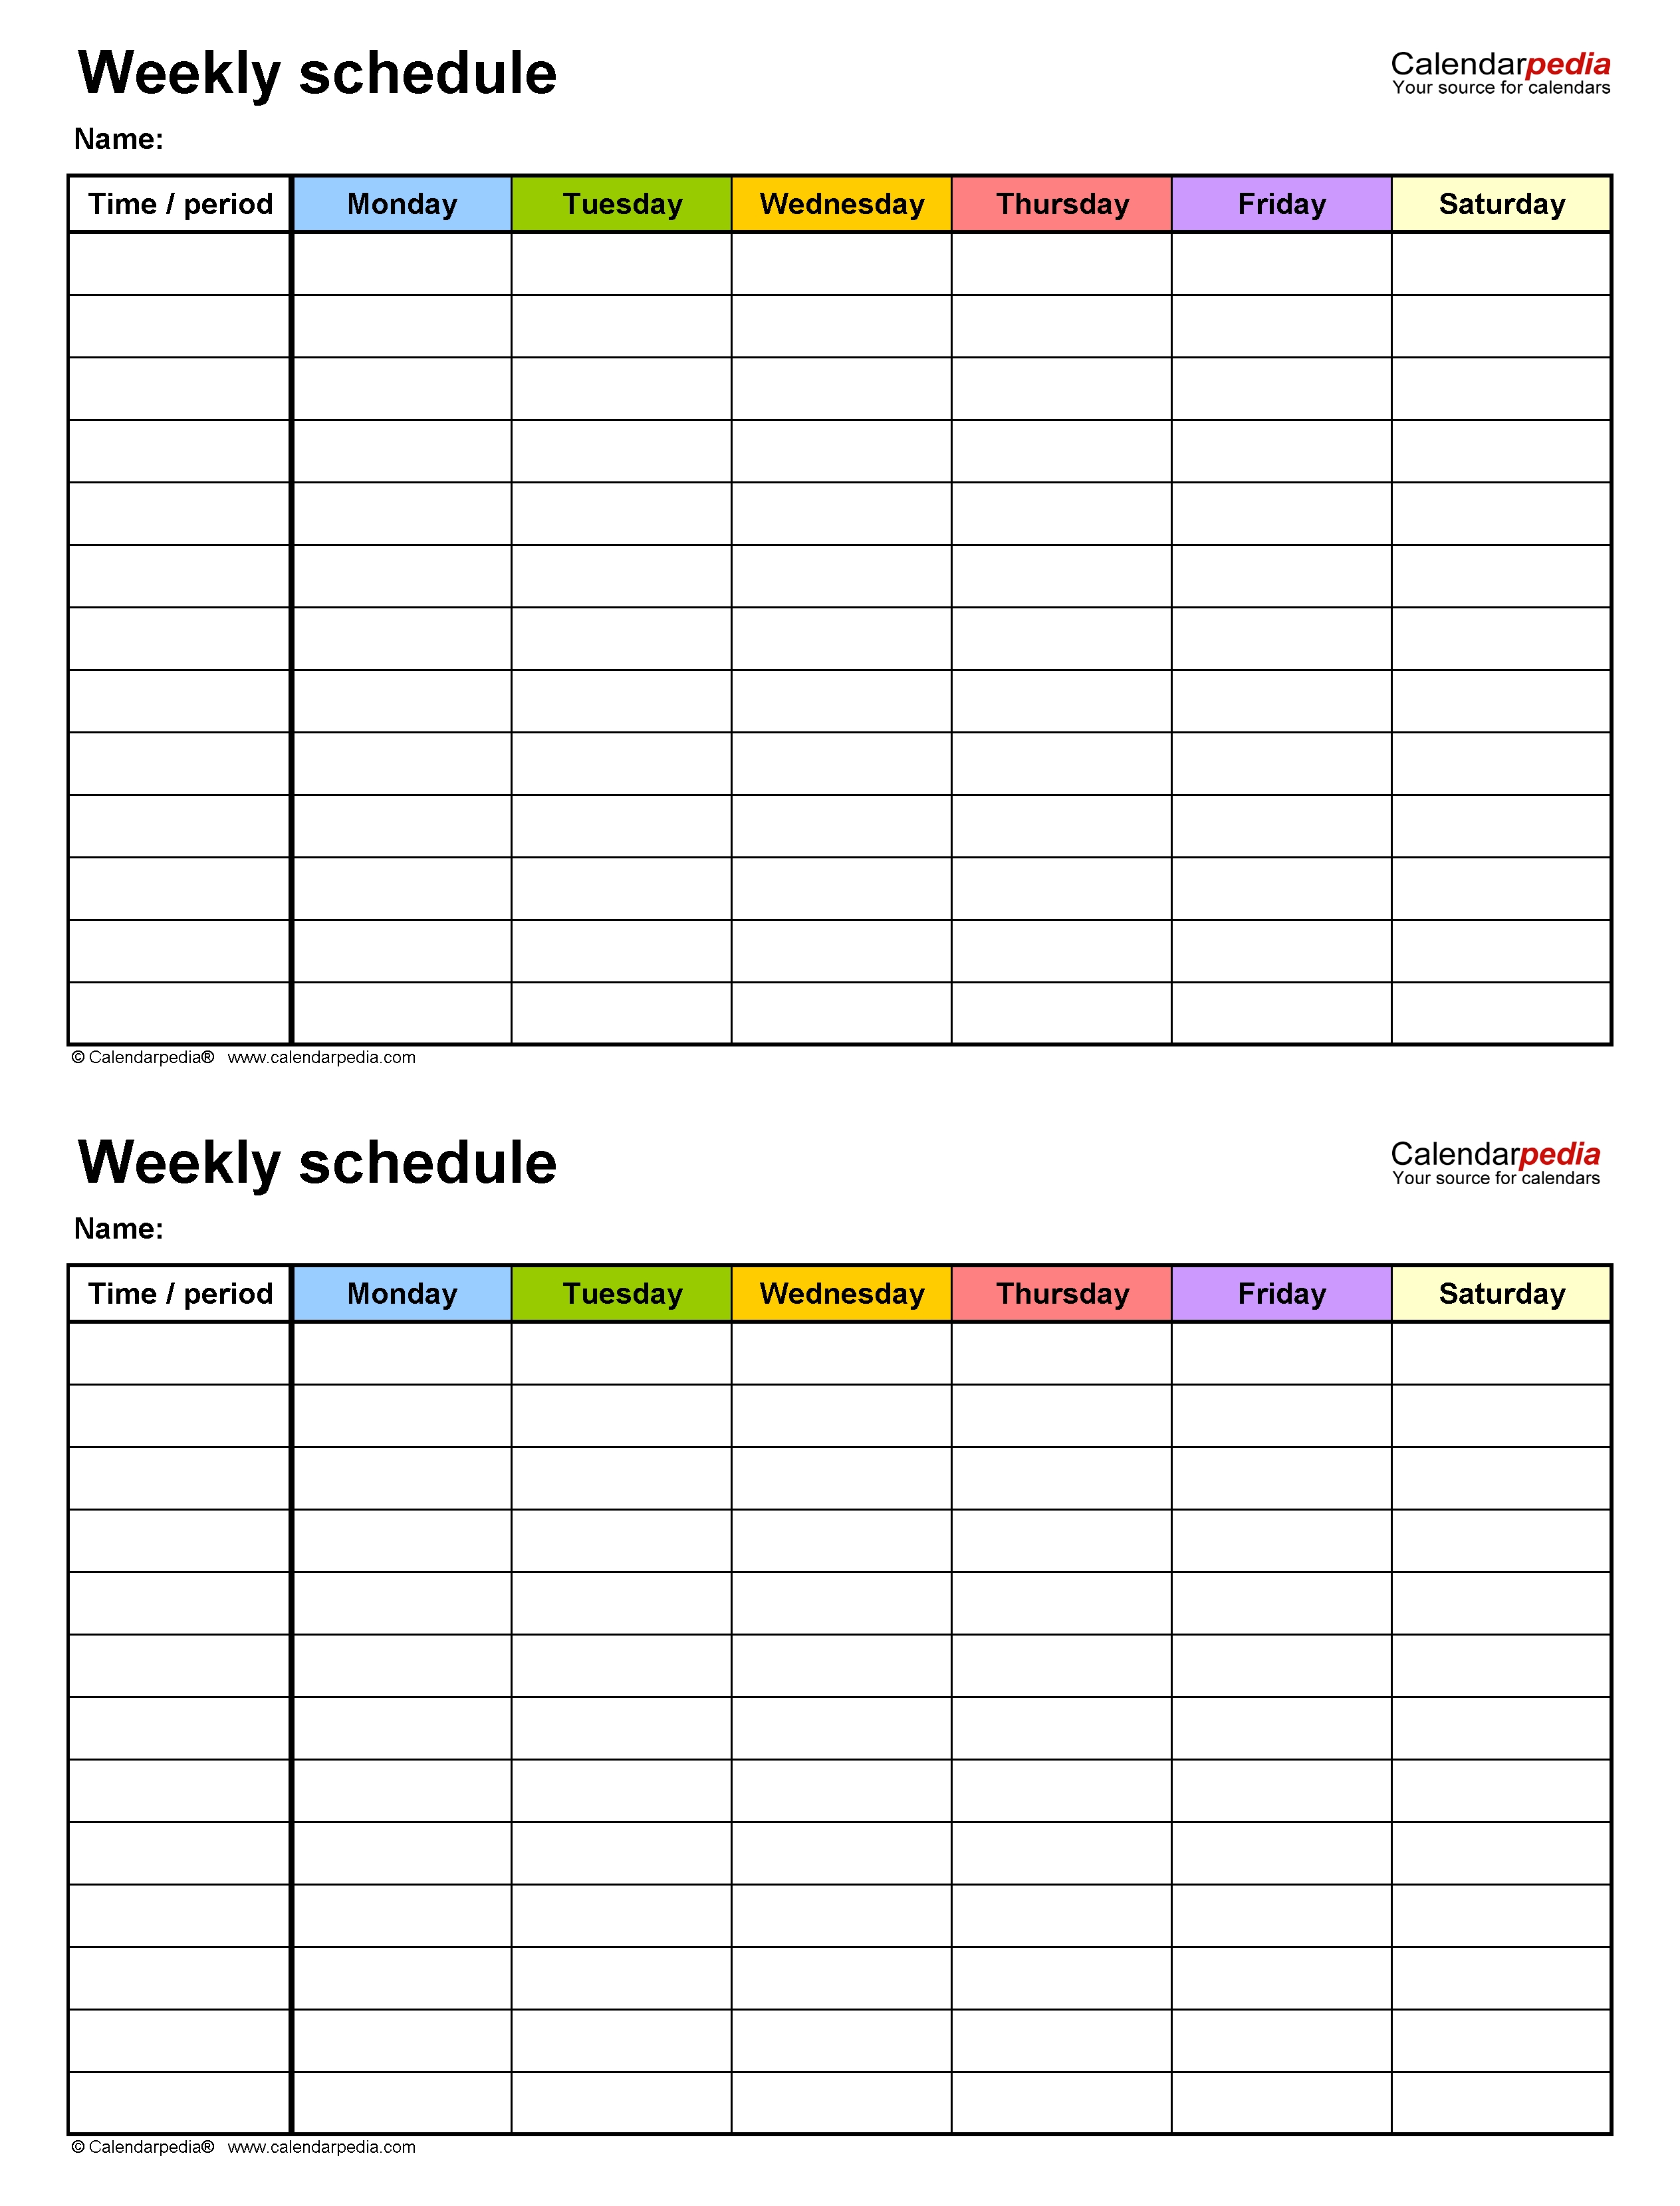 Free Weekly Schedule Templates For Excel - 18 Templates Calendar Week Template Excel